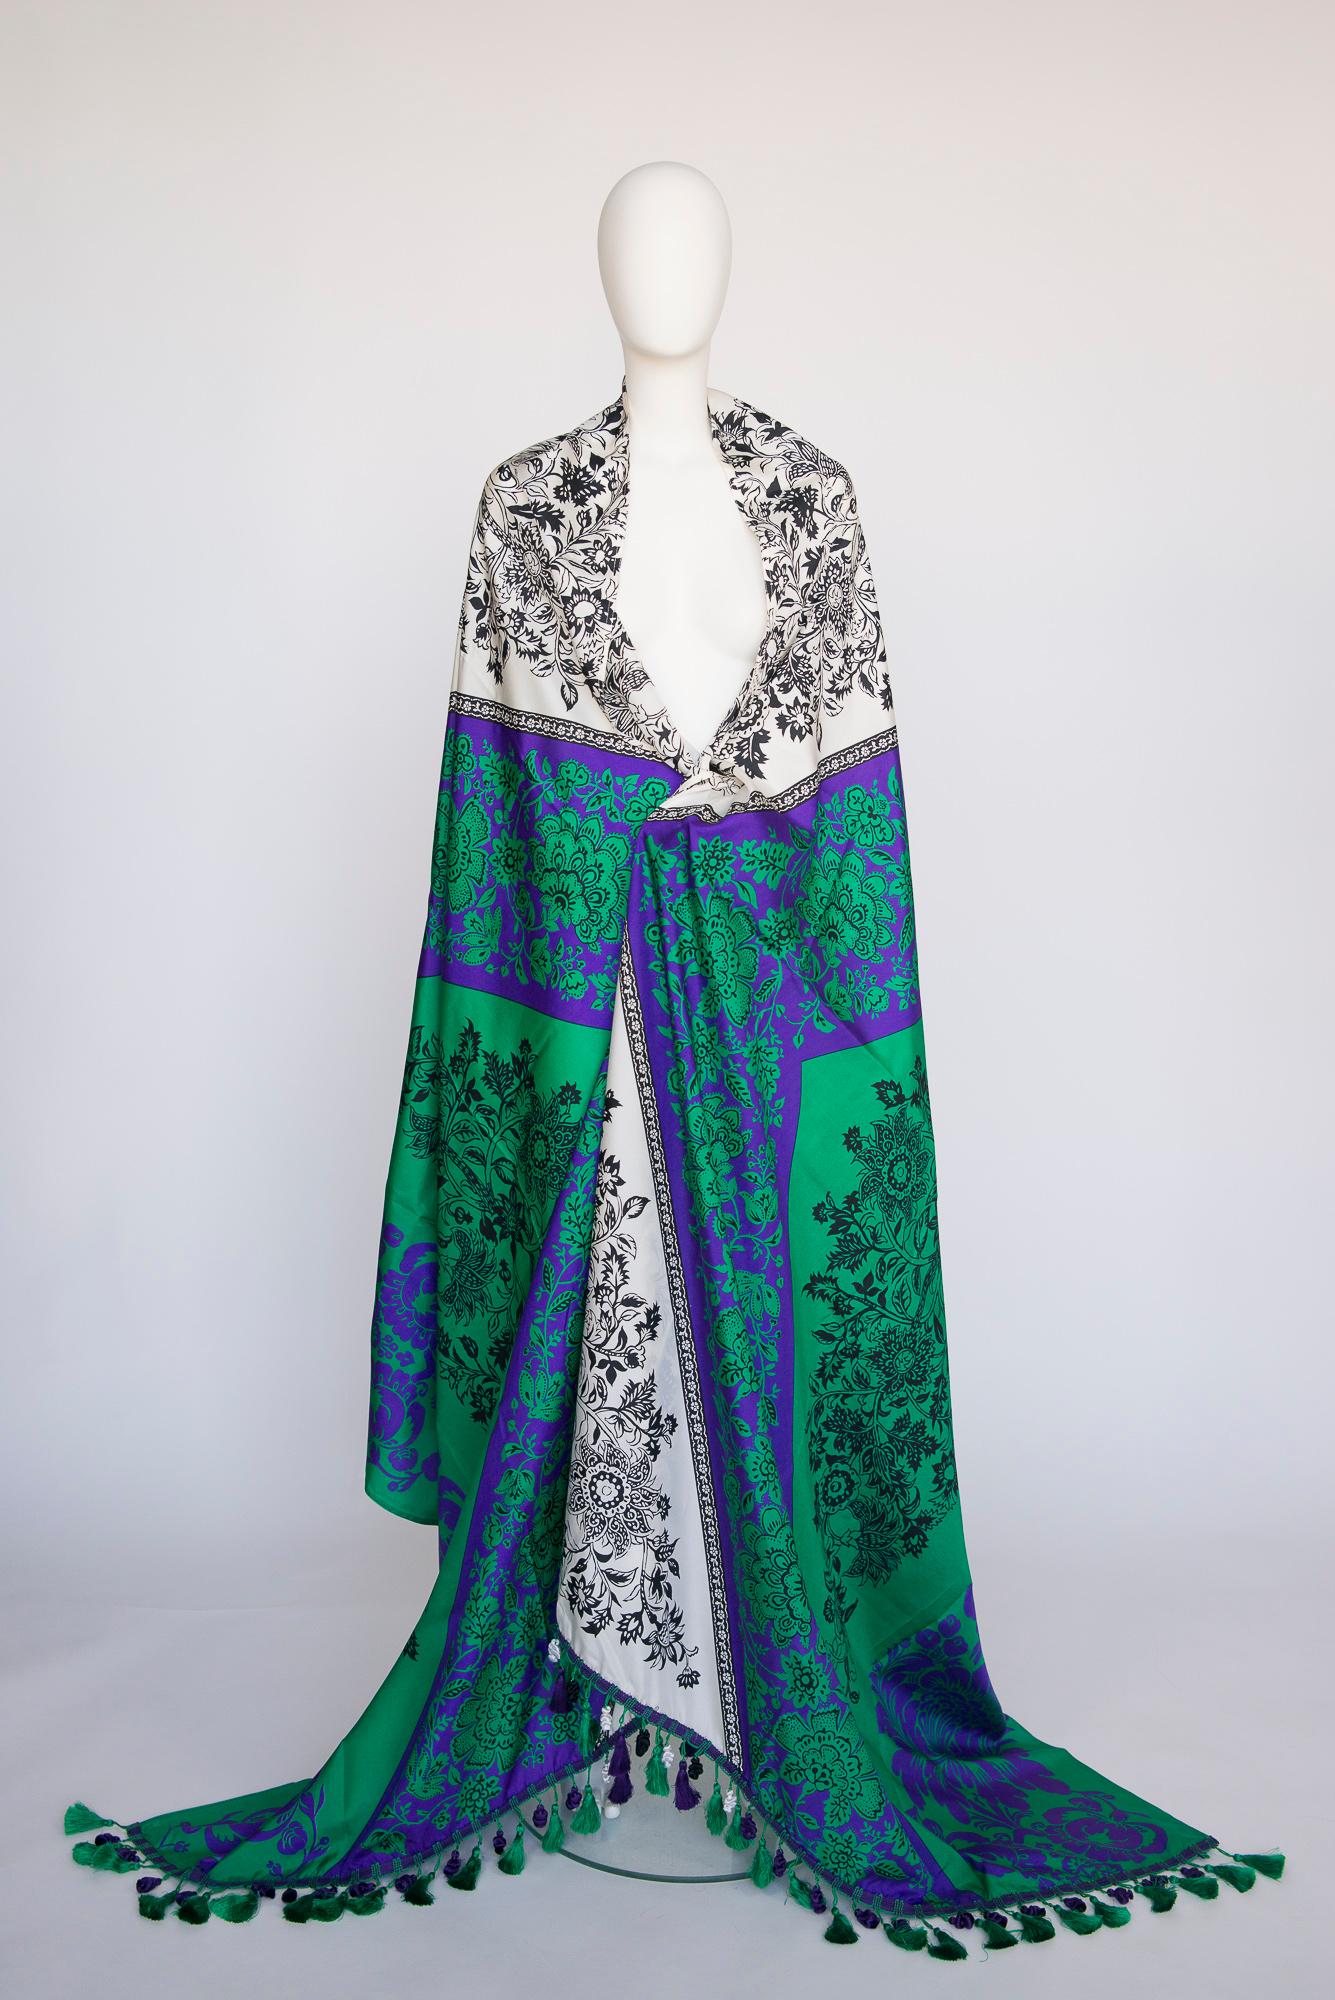 Rare Documented Gianni Versace Sera Fringed Giant Stole Shawl, SS 1988 For Sale 7